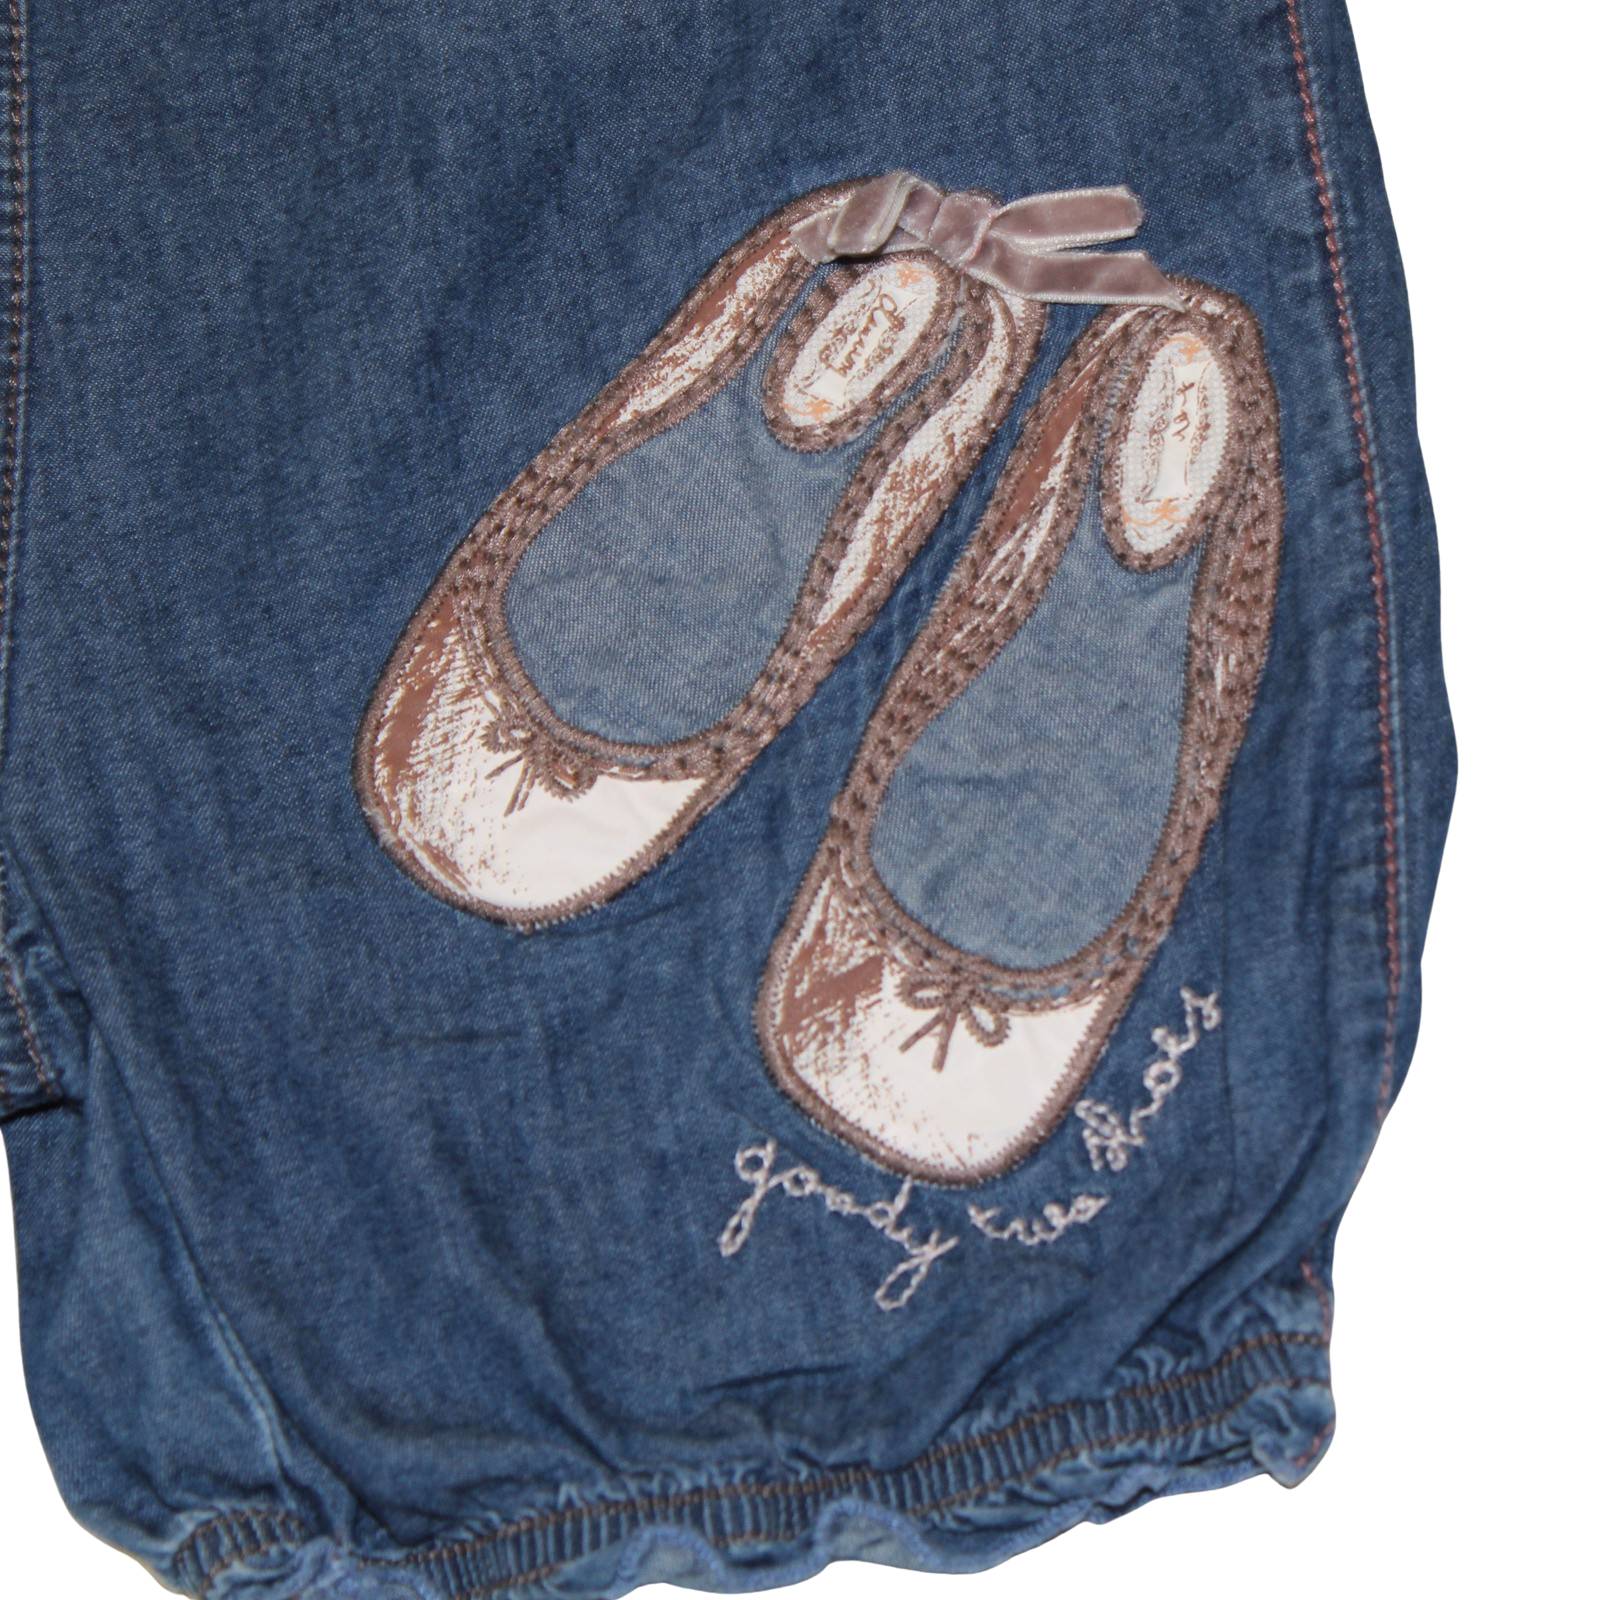 Bloomer Dungarees &#039;Goody Two Shoes&#039;